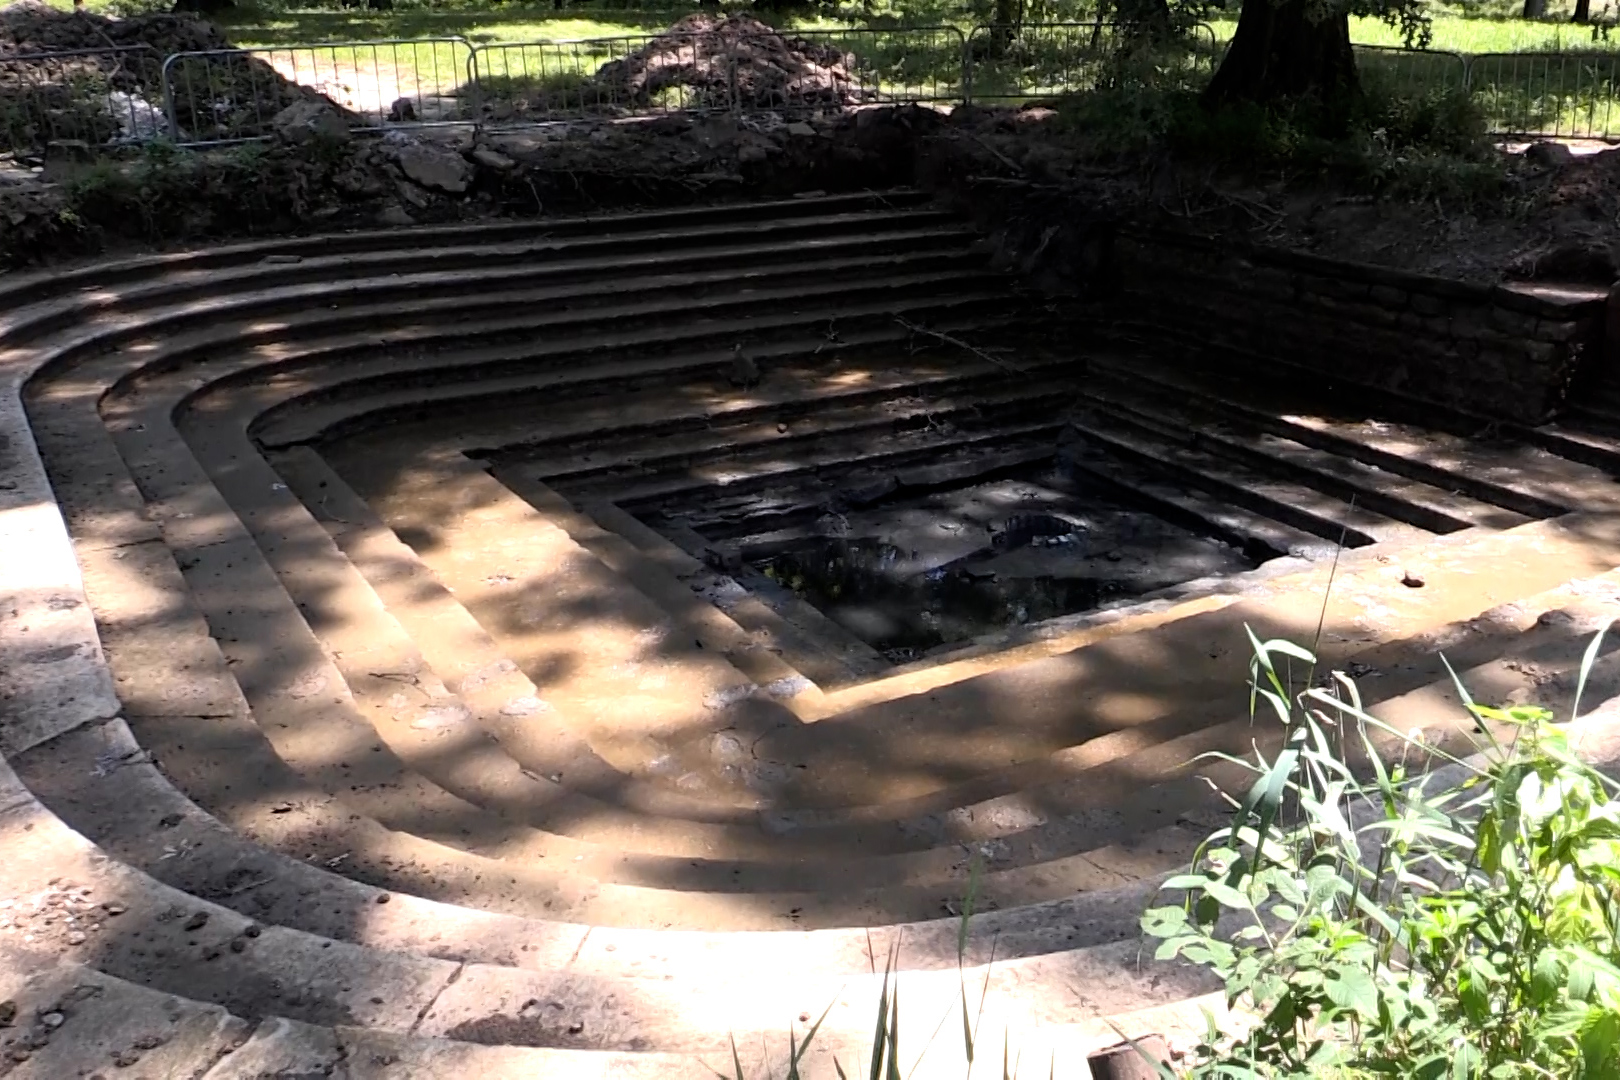 The Neptune Spring, which was recently uncovered on the grounds of the West Baden Springs Hotel